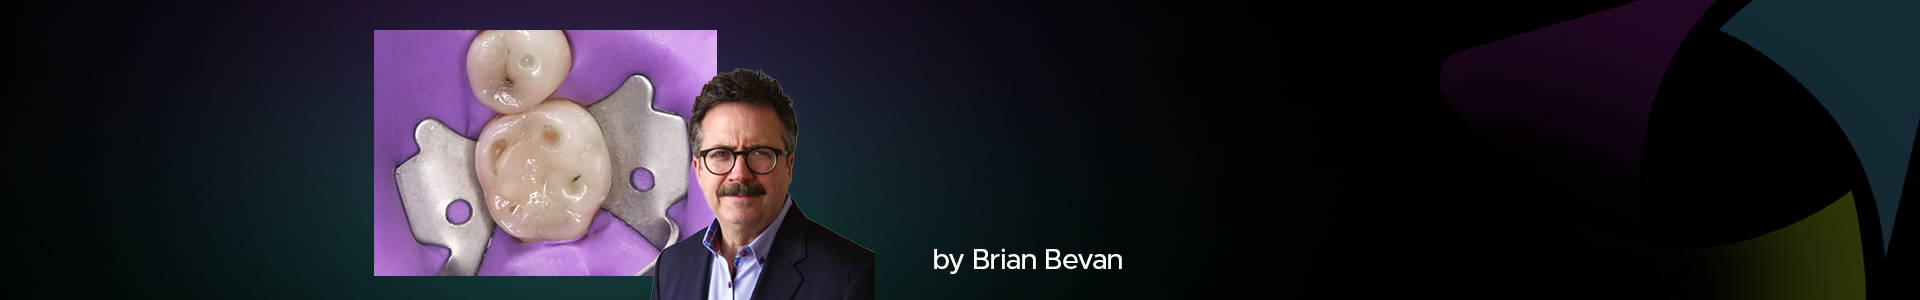 blog banner featuring Brian Bevan and clinical image in the back